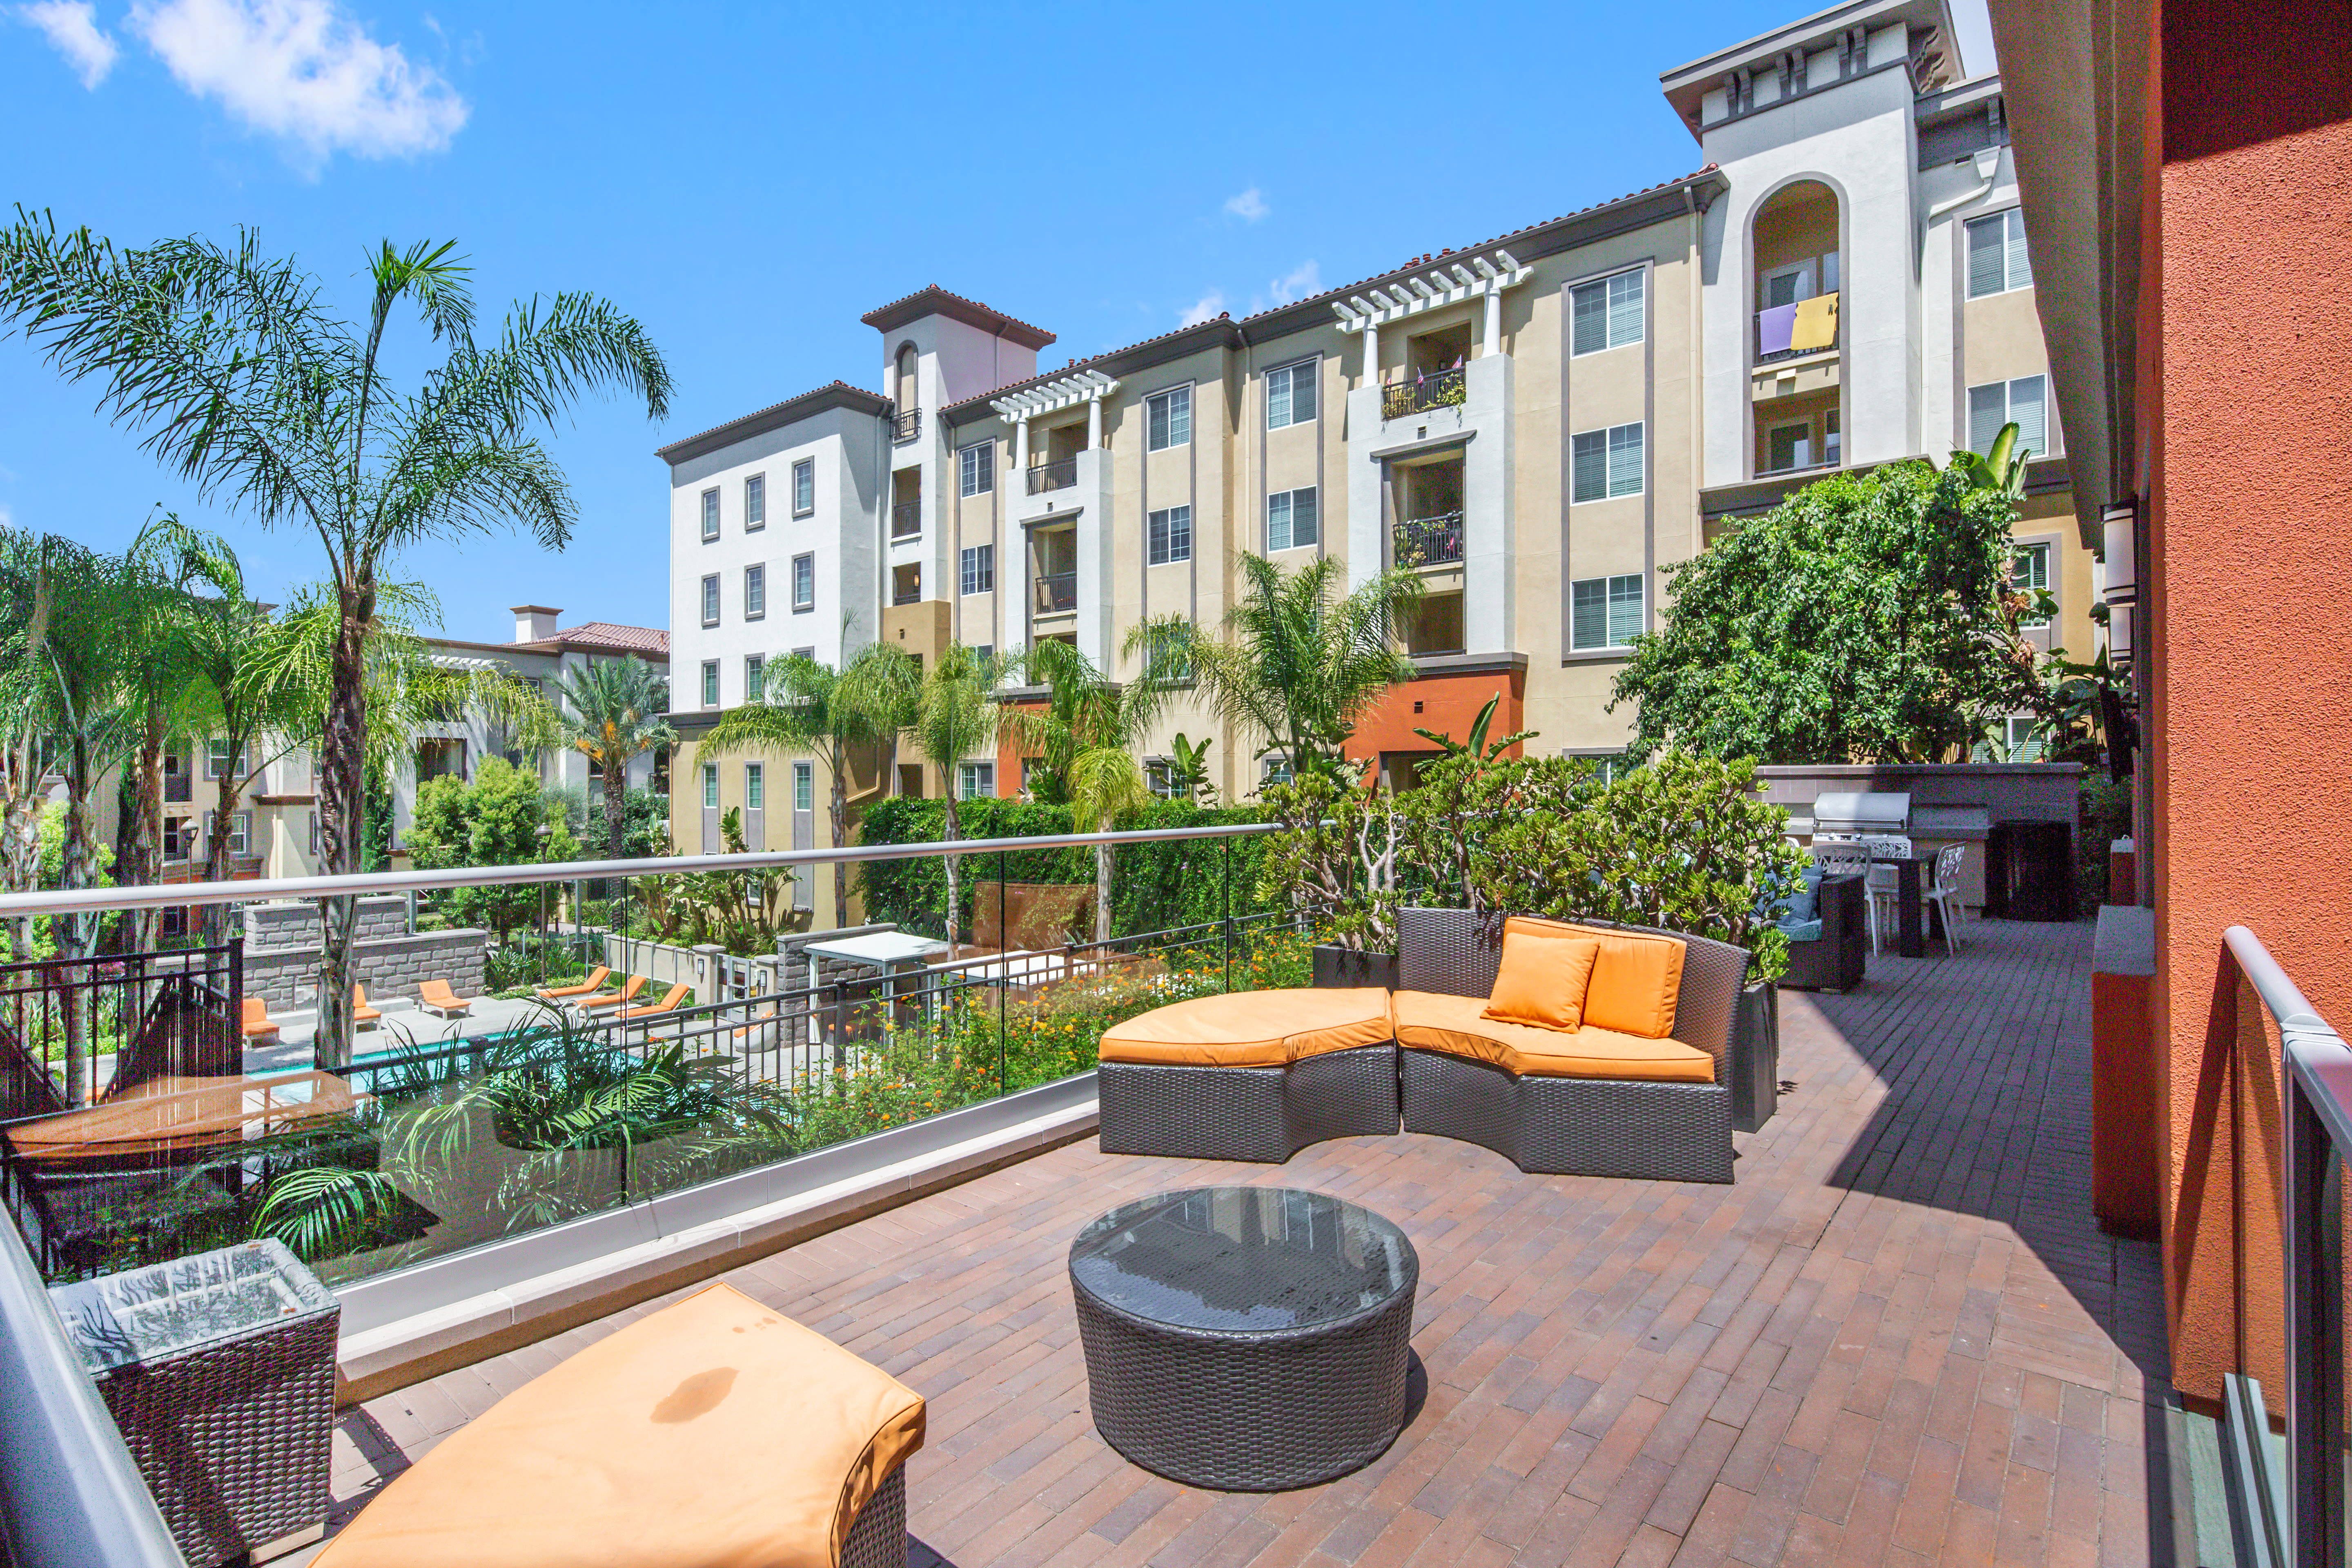 Outdoor balcony at The Boulevard Apartment Homes in Woodland Hills, California